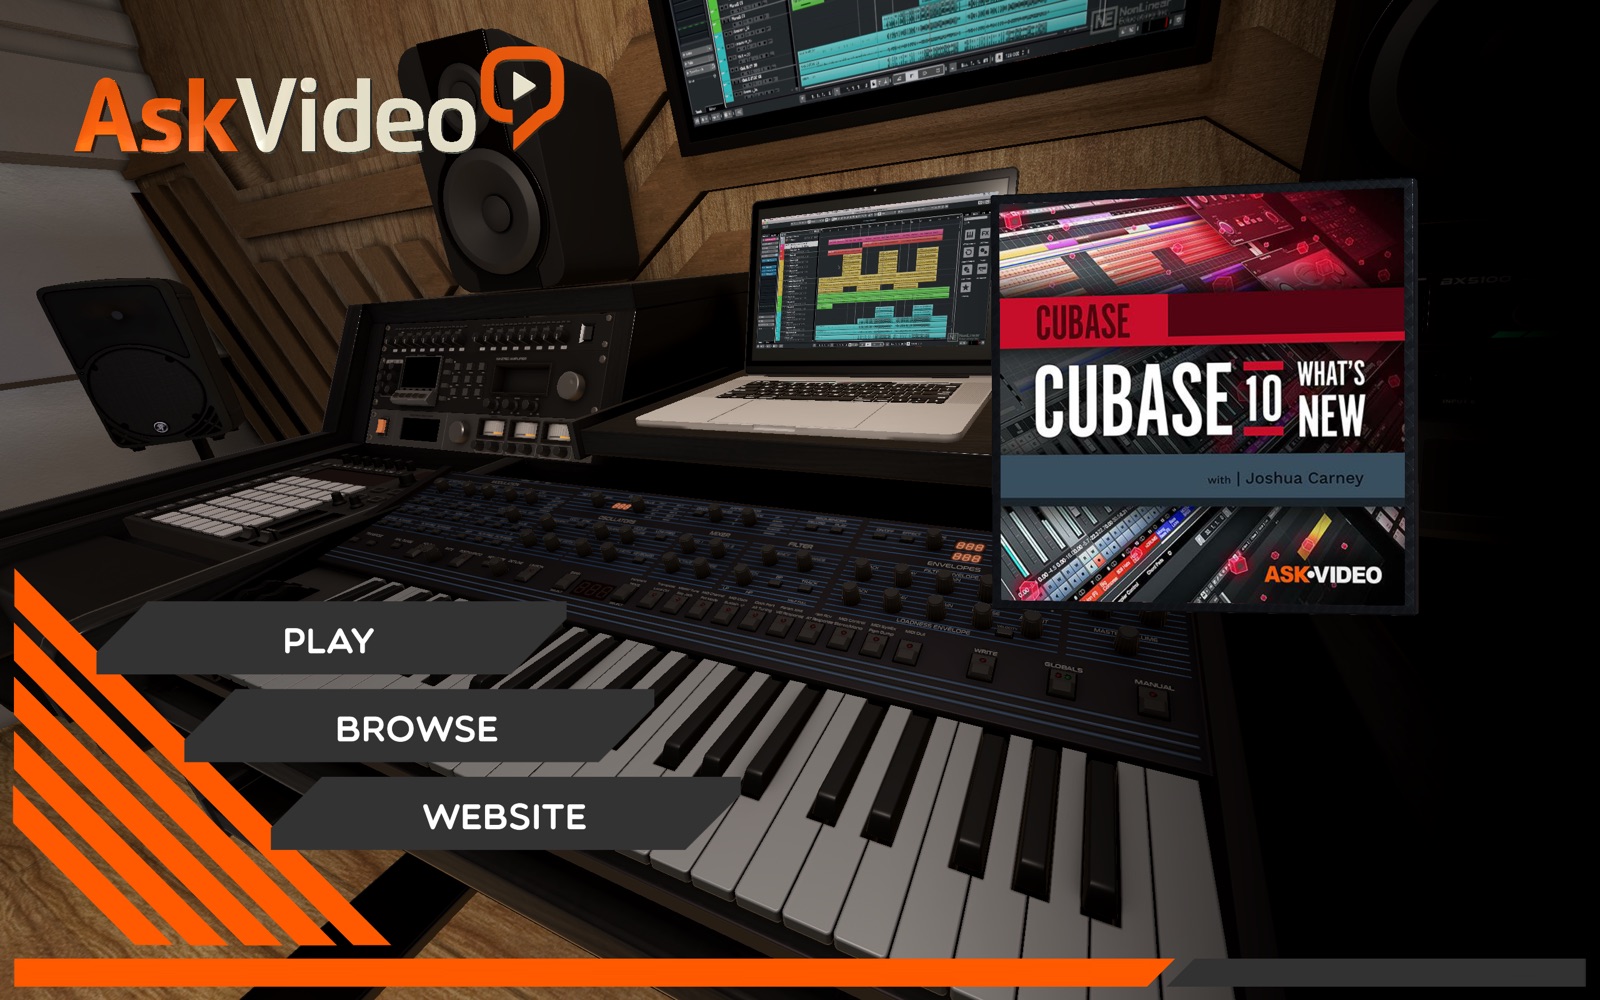 Whats New Course For Cubase 10 7.1 : Main Window